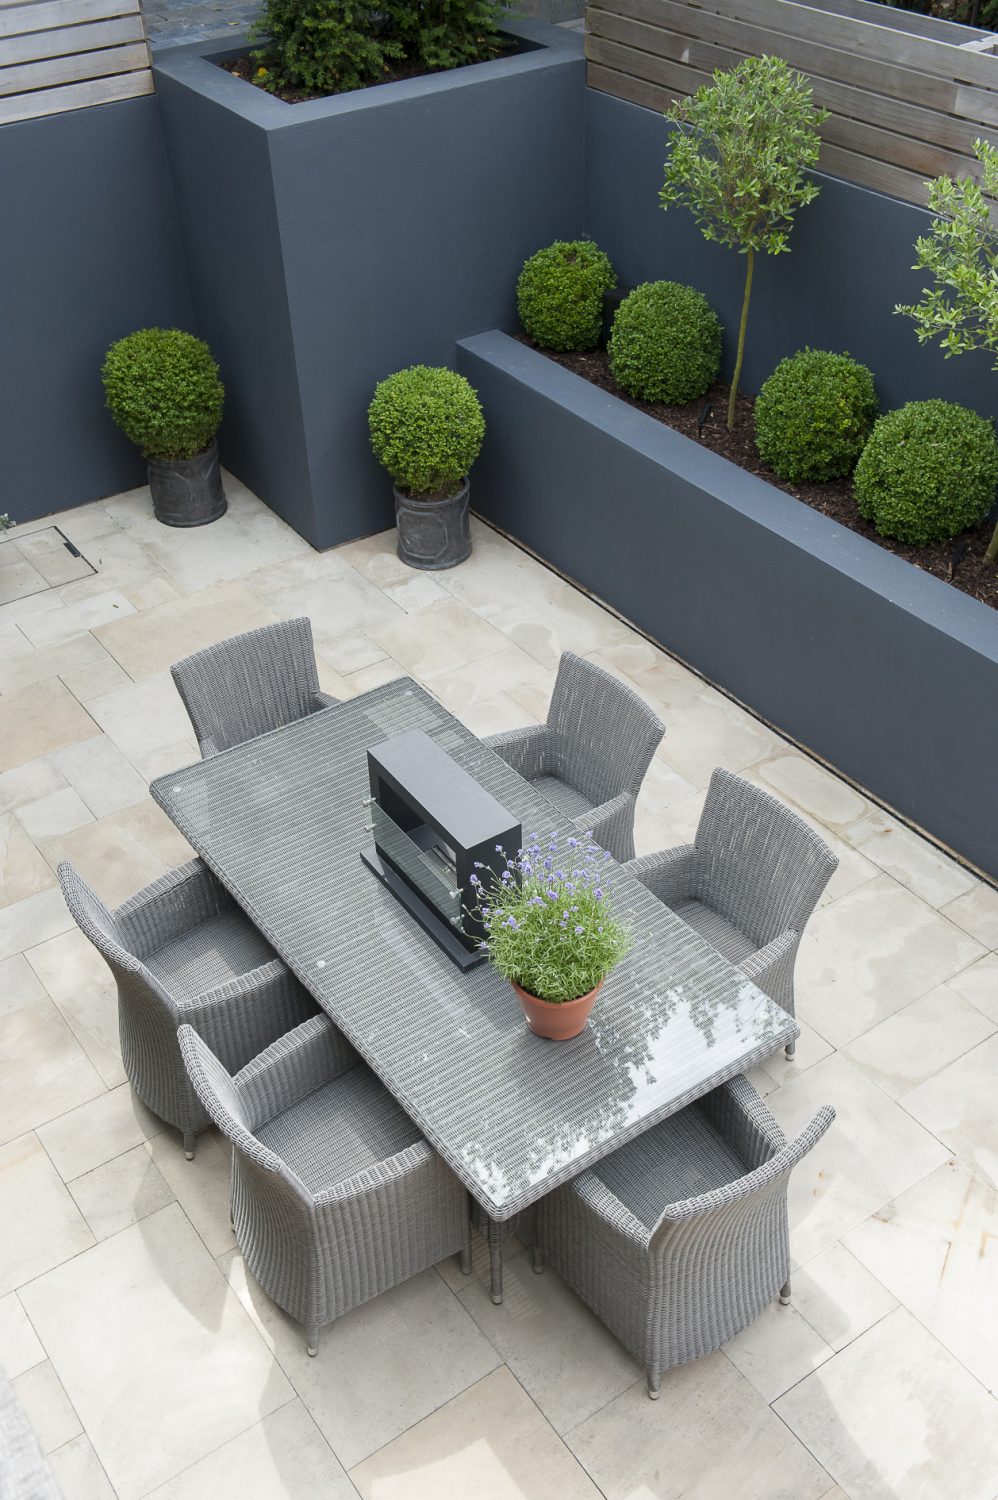 The outdoor dining space, perfect for entertaining